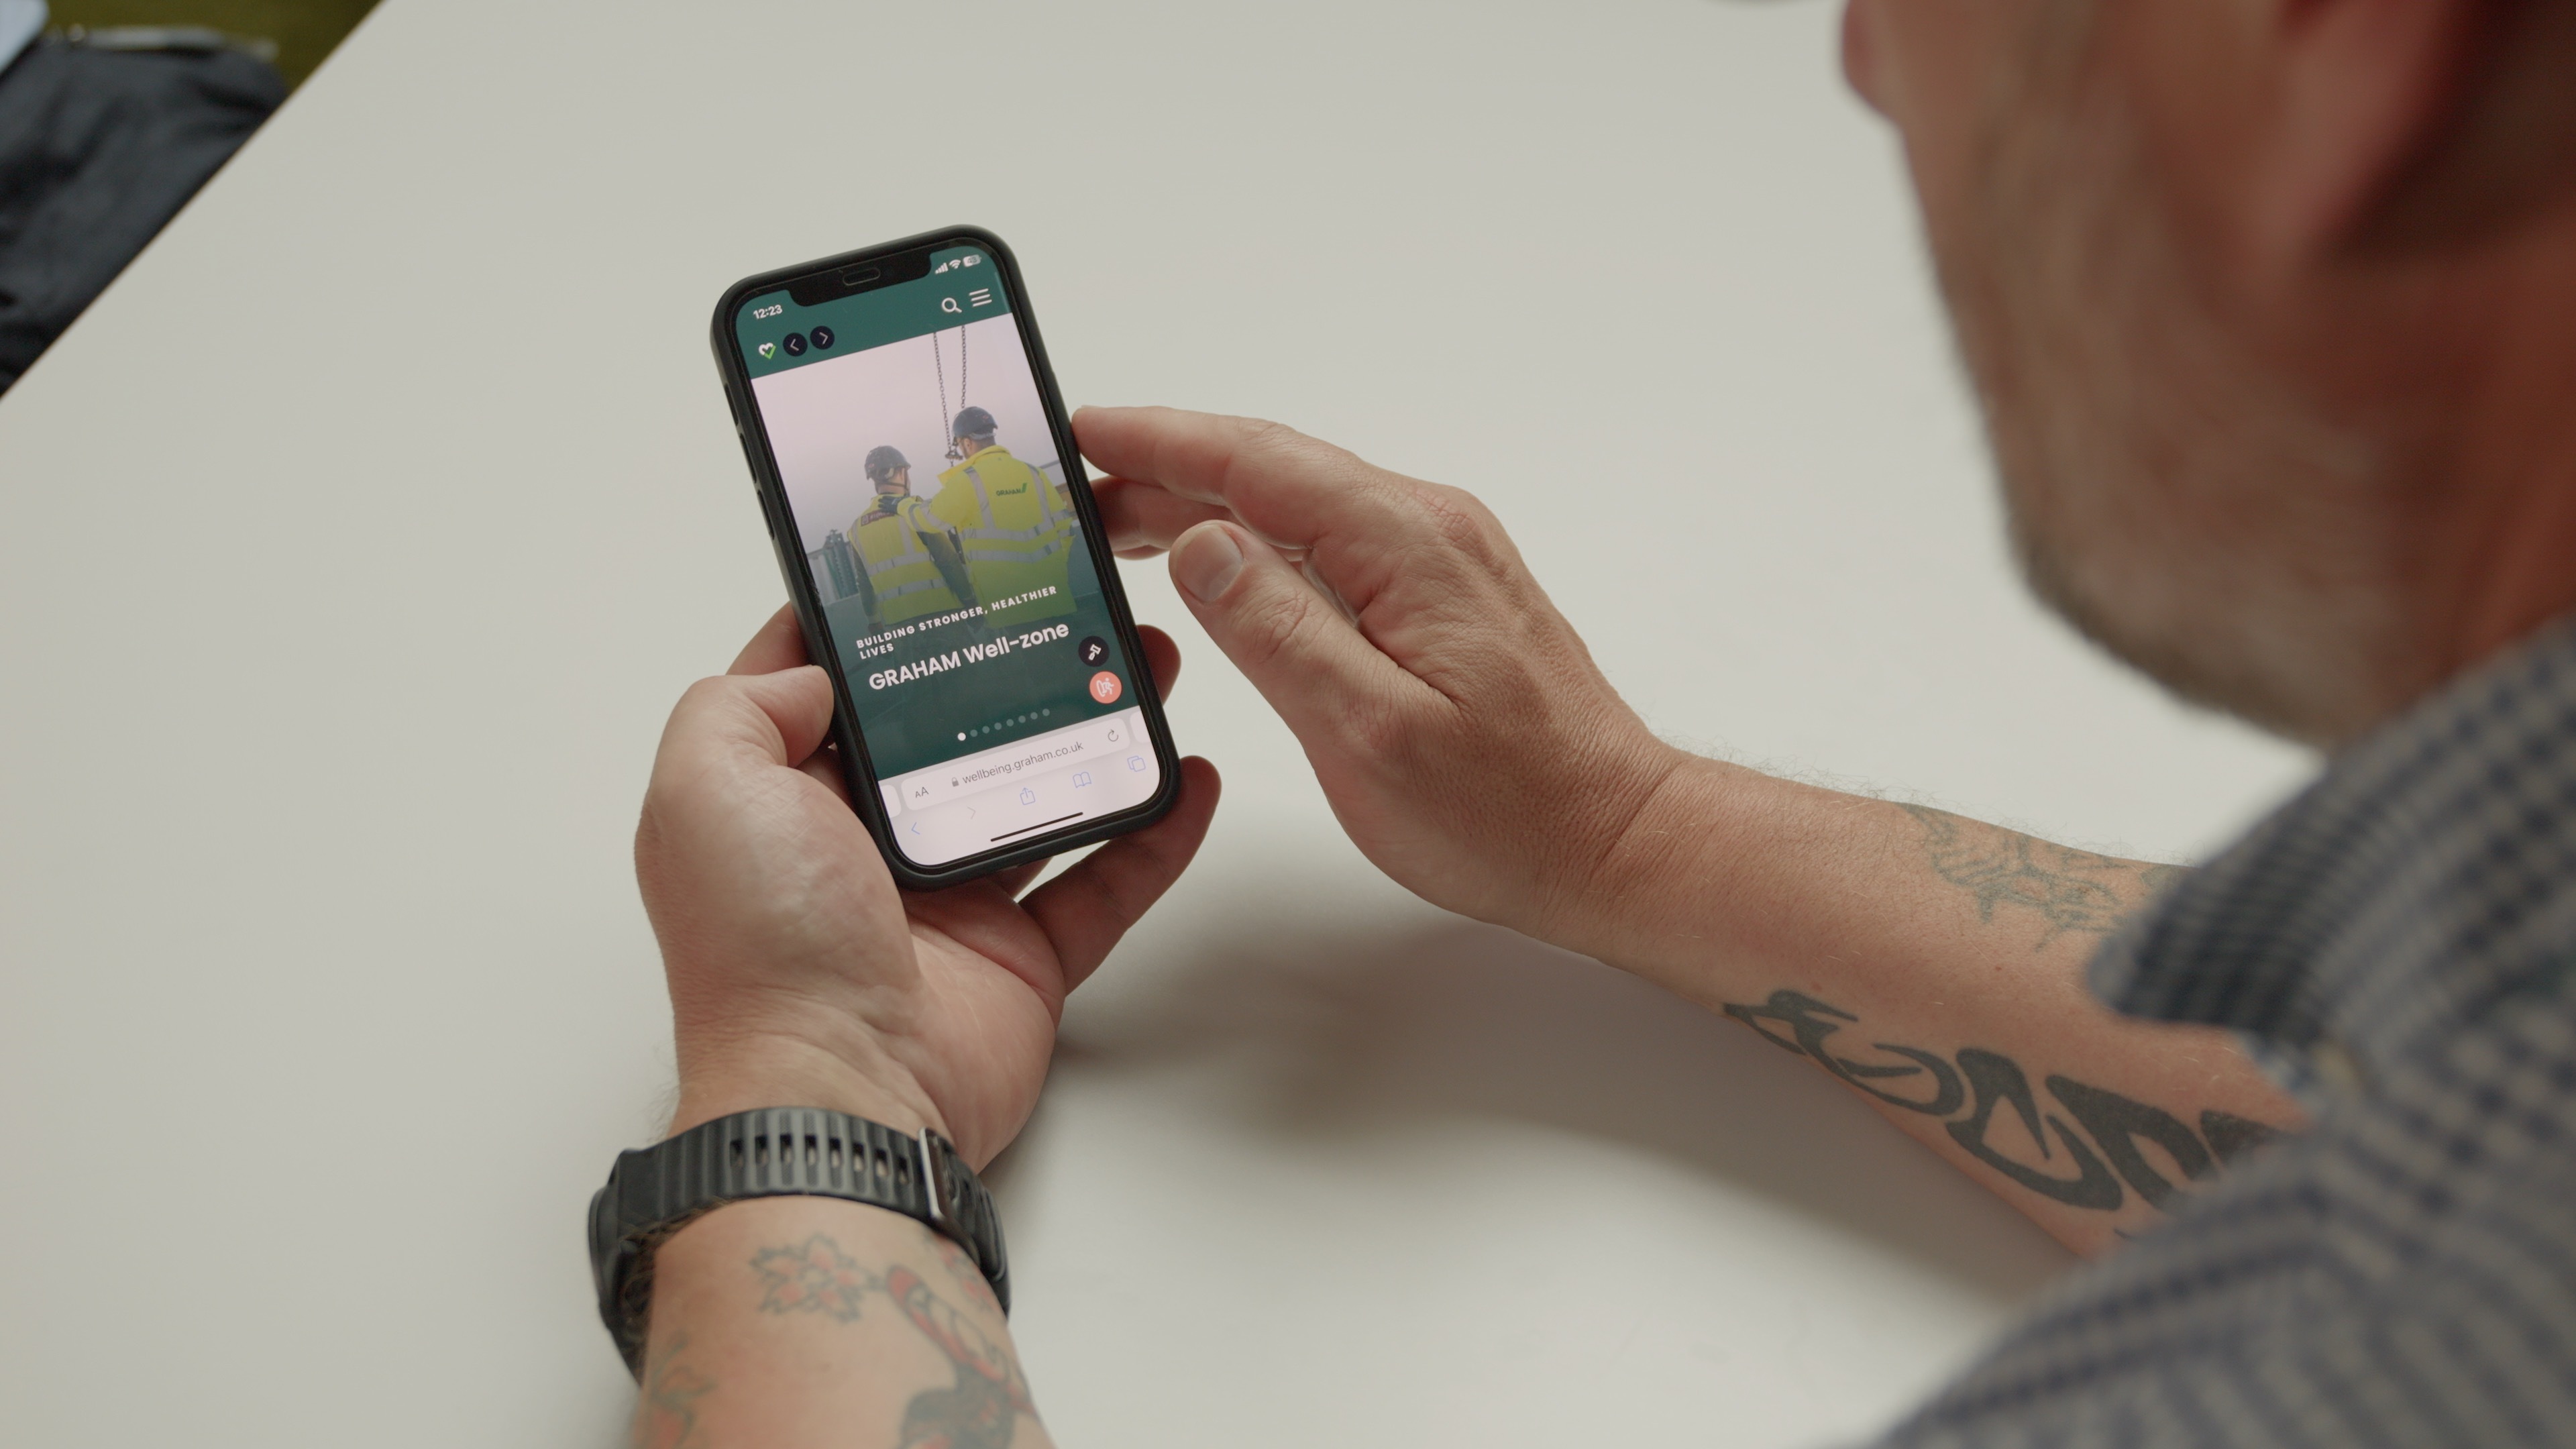 GRAHAM Introduces Netflix-style Wellbeing App image